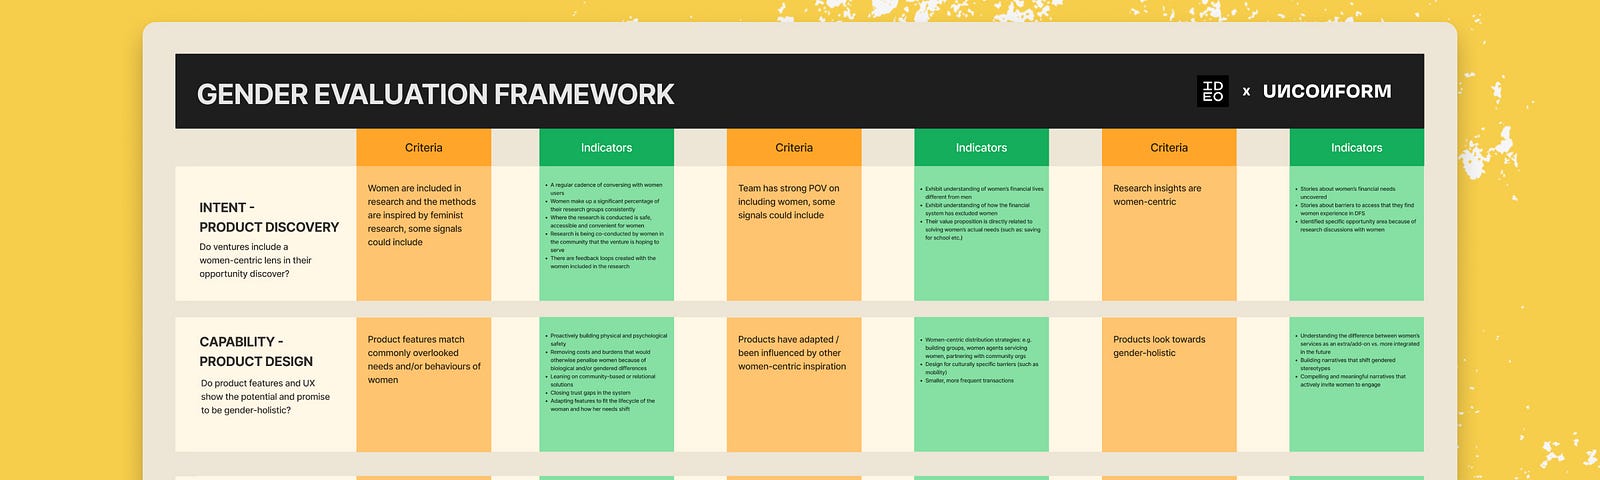 Screen from the Gender Evaluation Framework showing a variety of criteria.